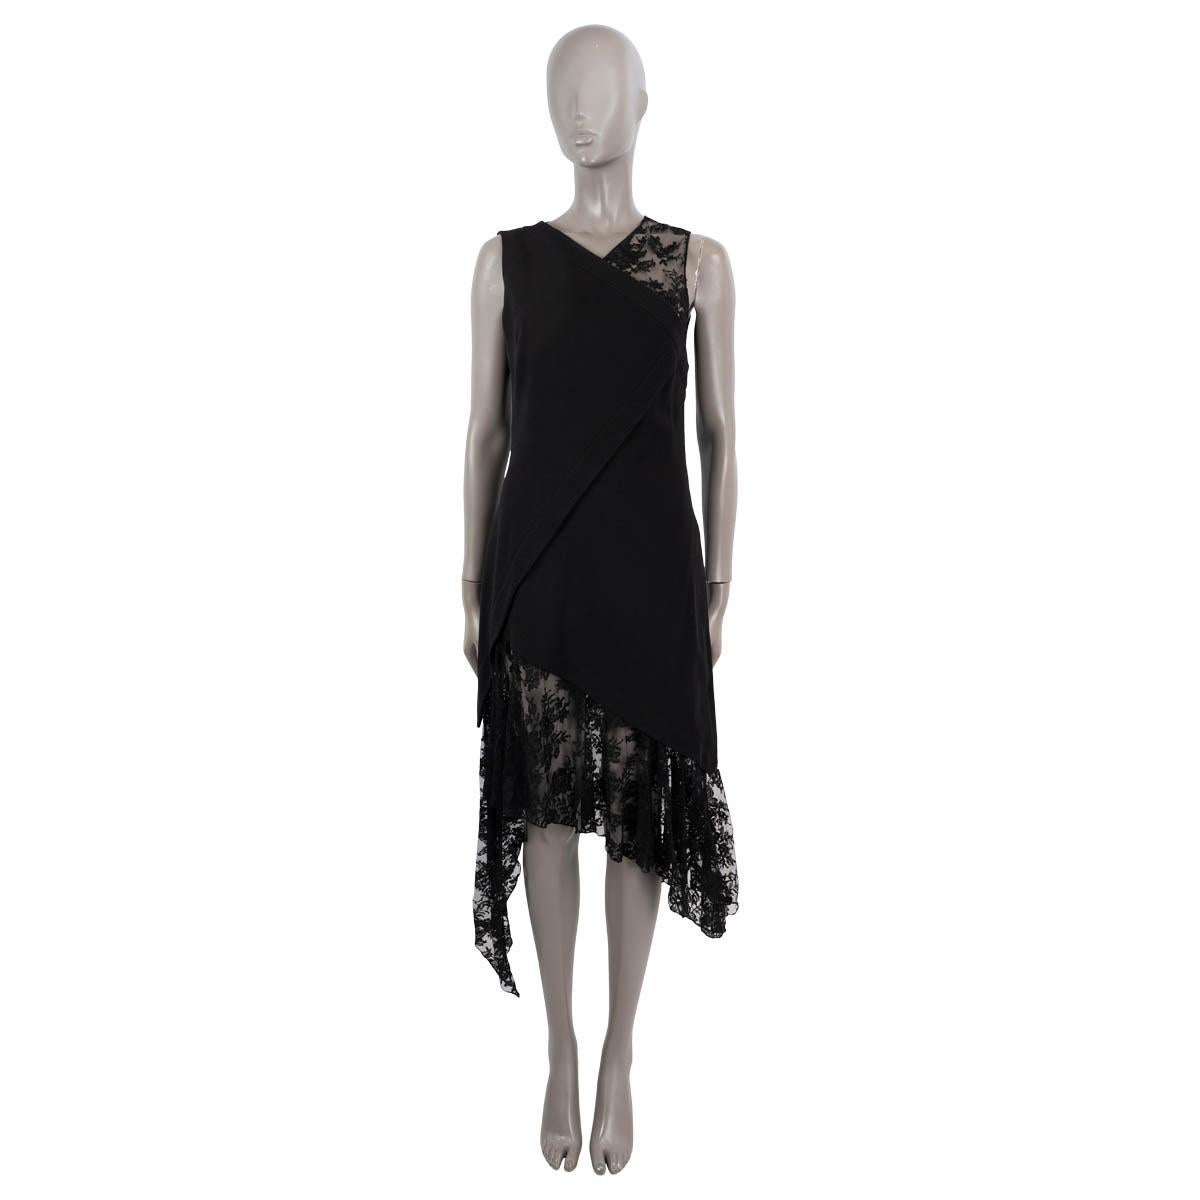 100% authentic Givenchy asymmetric cocktail dress in black wool (100%) and lace cotton (68%) and polyamide (32%). Opens with a hook and concealed zip on the side. Lined in silk (100%). Has been worn and is in excellent condition. 

2018